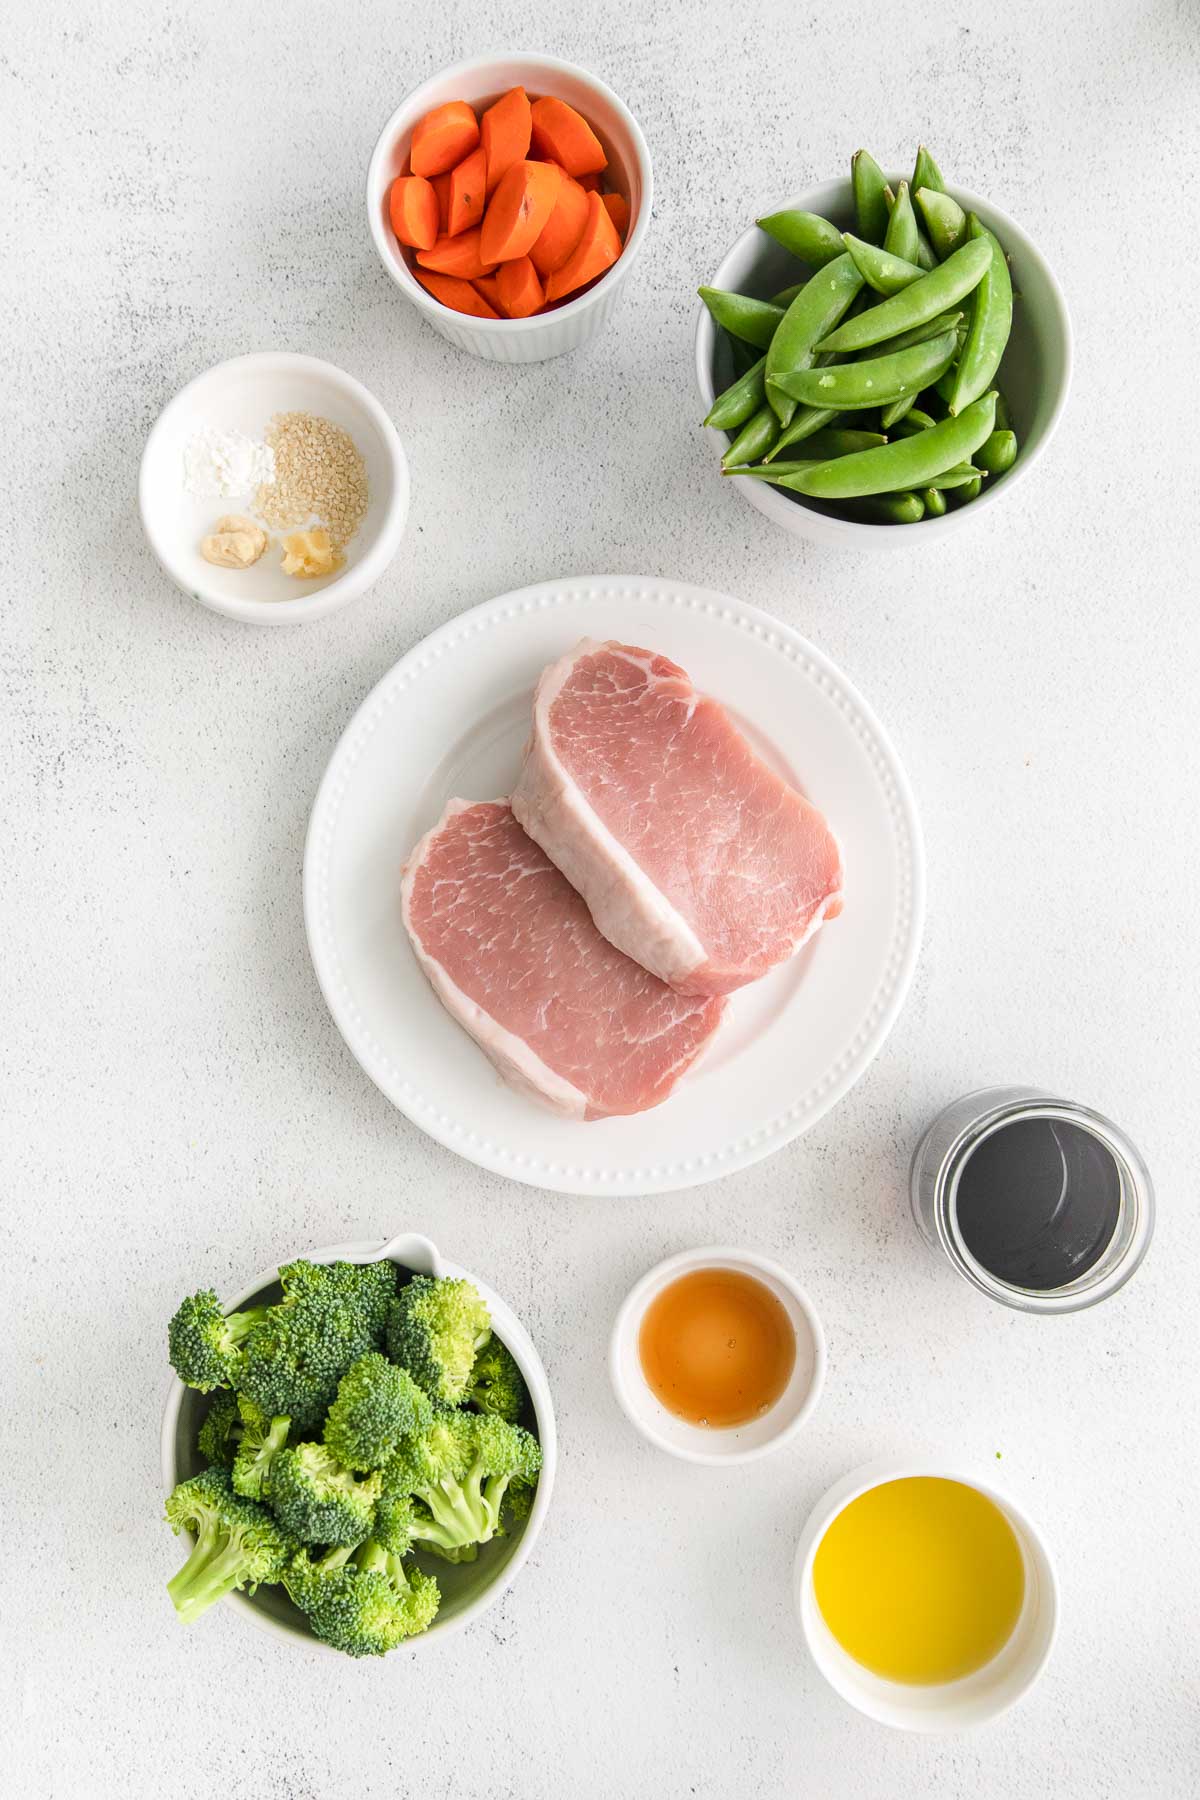 several white bowls with ingredients for asian pork chops - two thick cut pork chops, broccoli florets, snap peas, cut carrots, soy sauce, oil , garlic and ginger